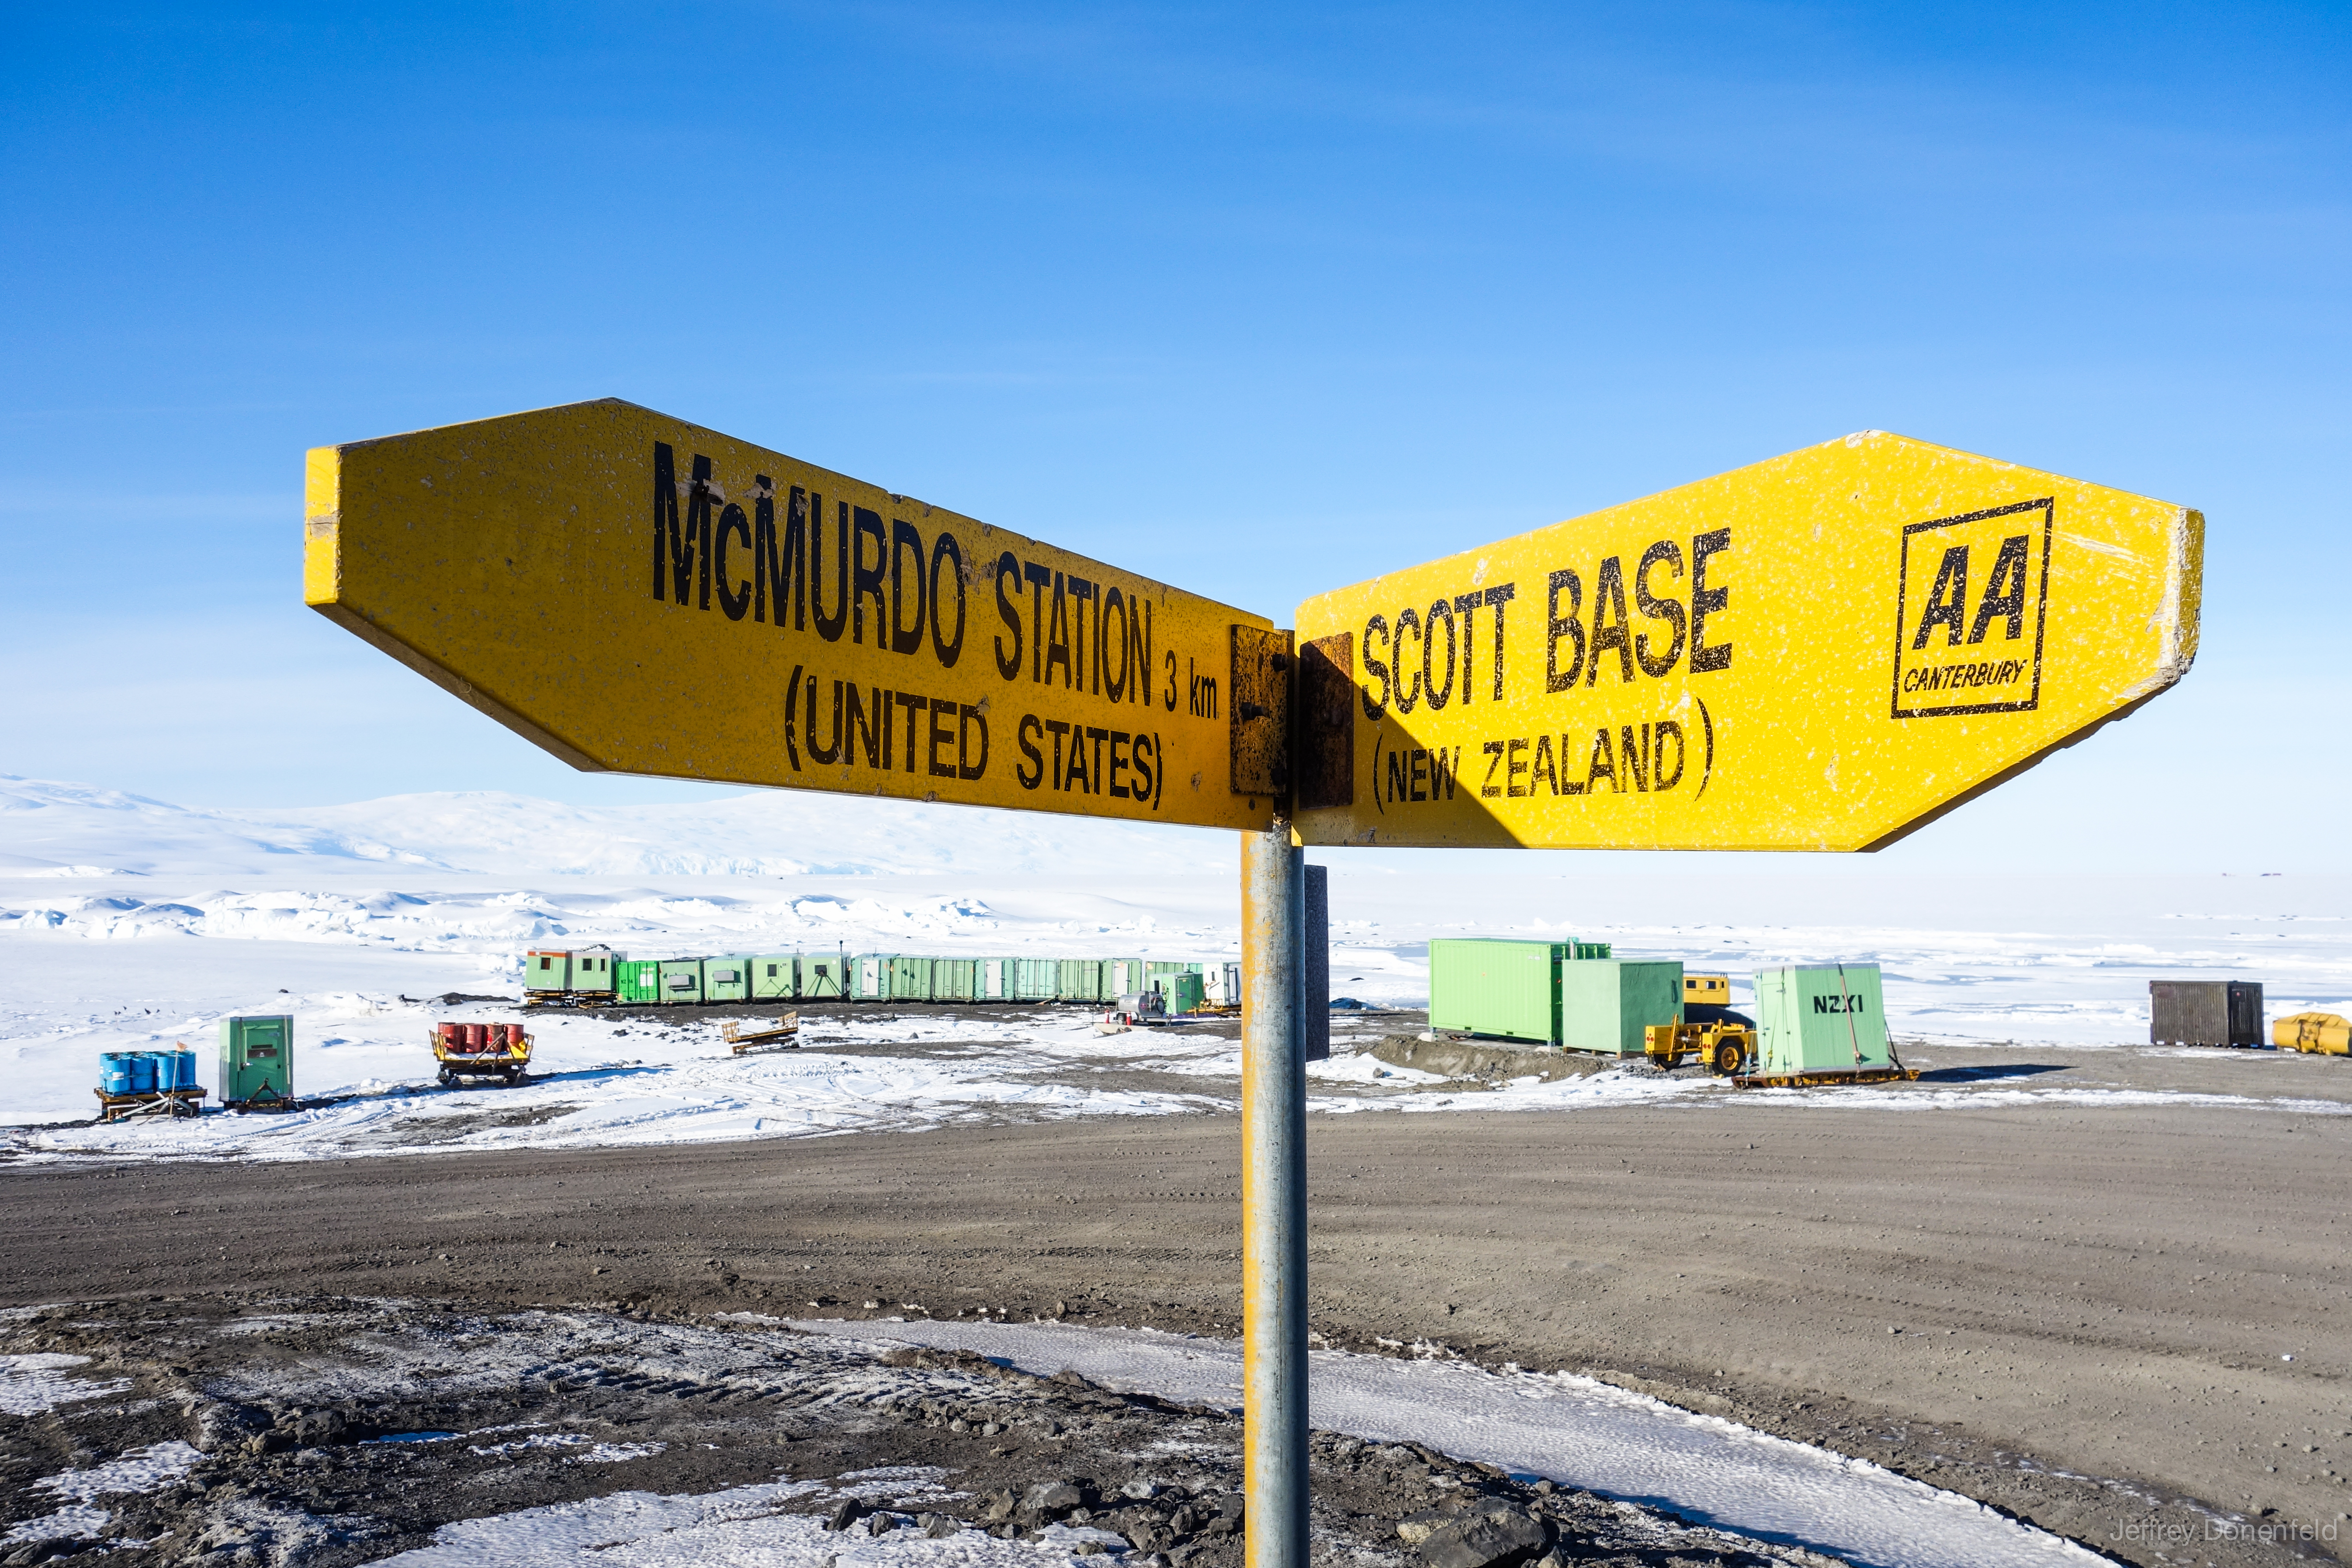 Back to McMurdo